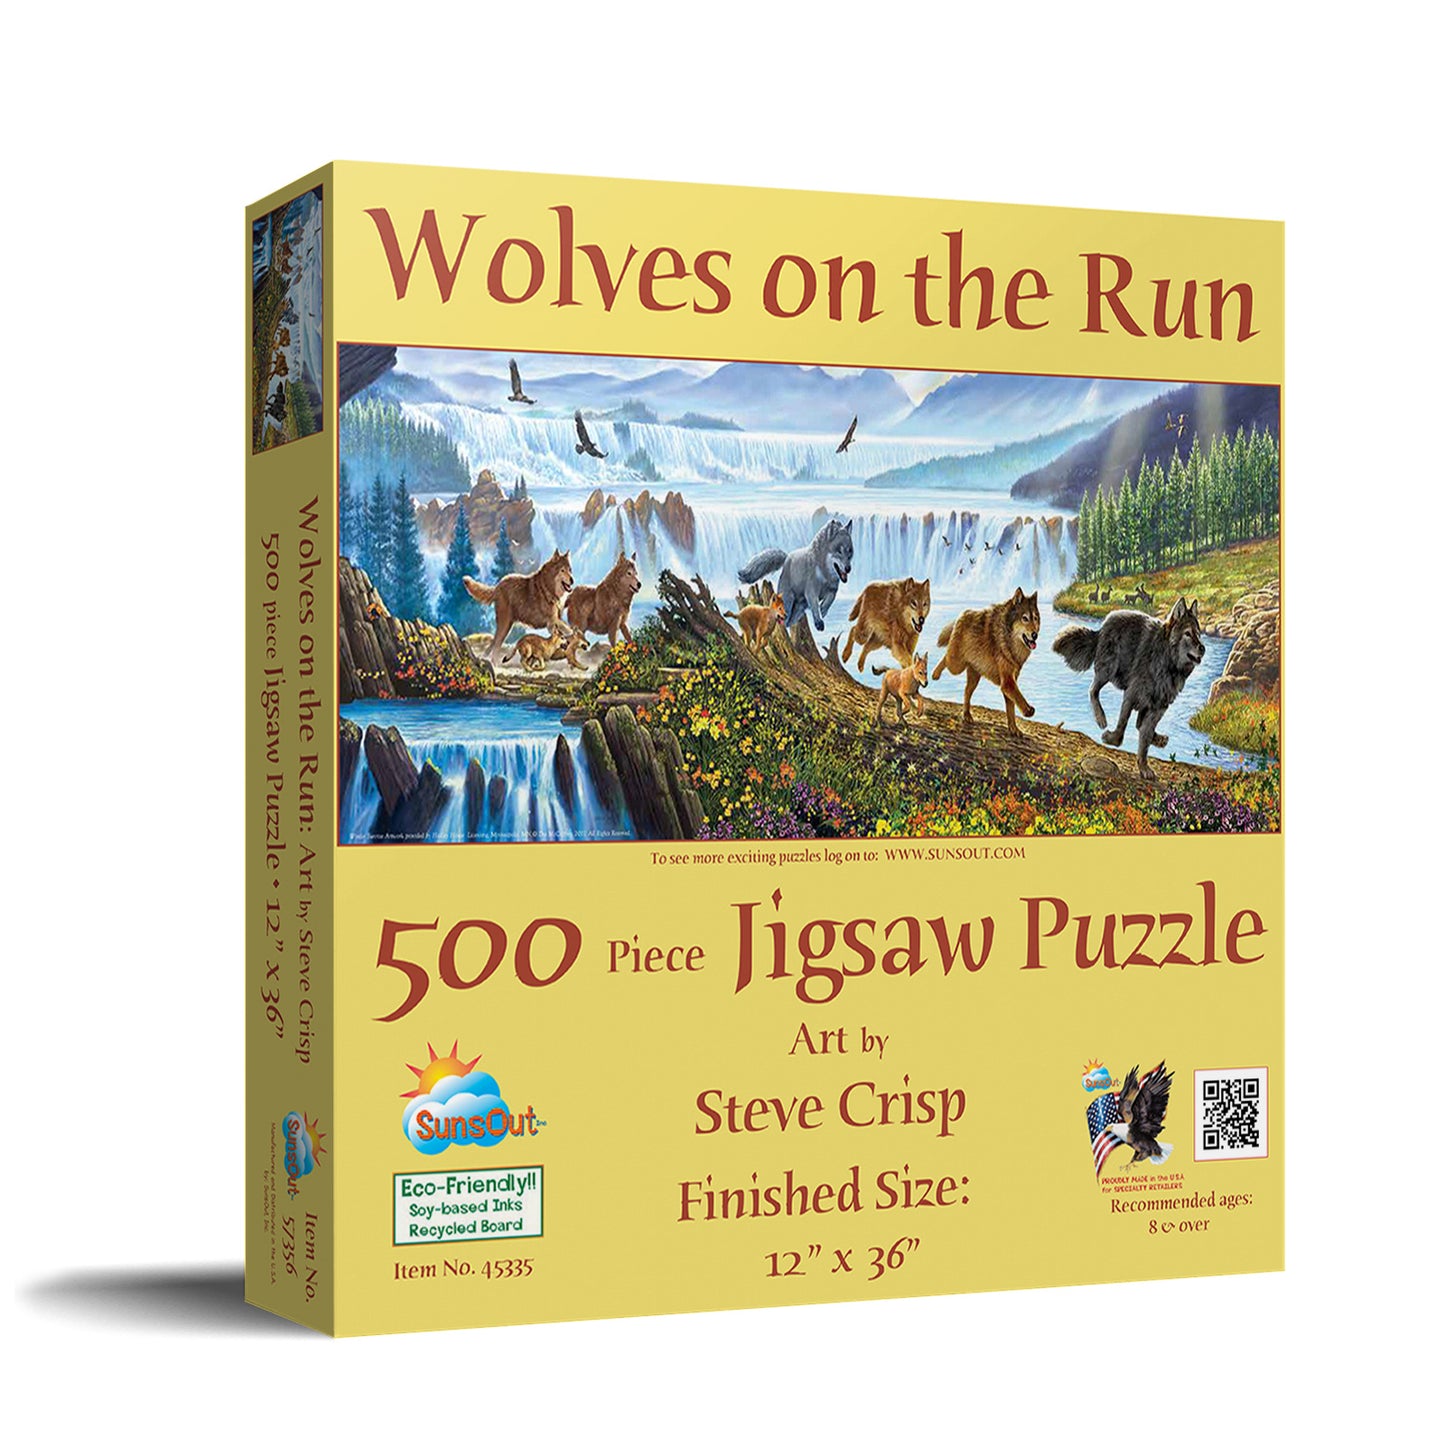 Wolves on the Run - 500 Piece Jigsaw Puzzle